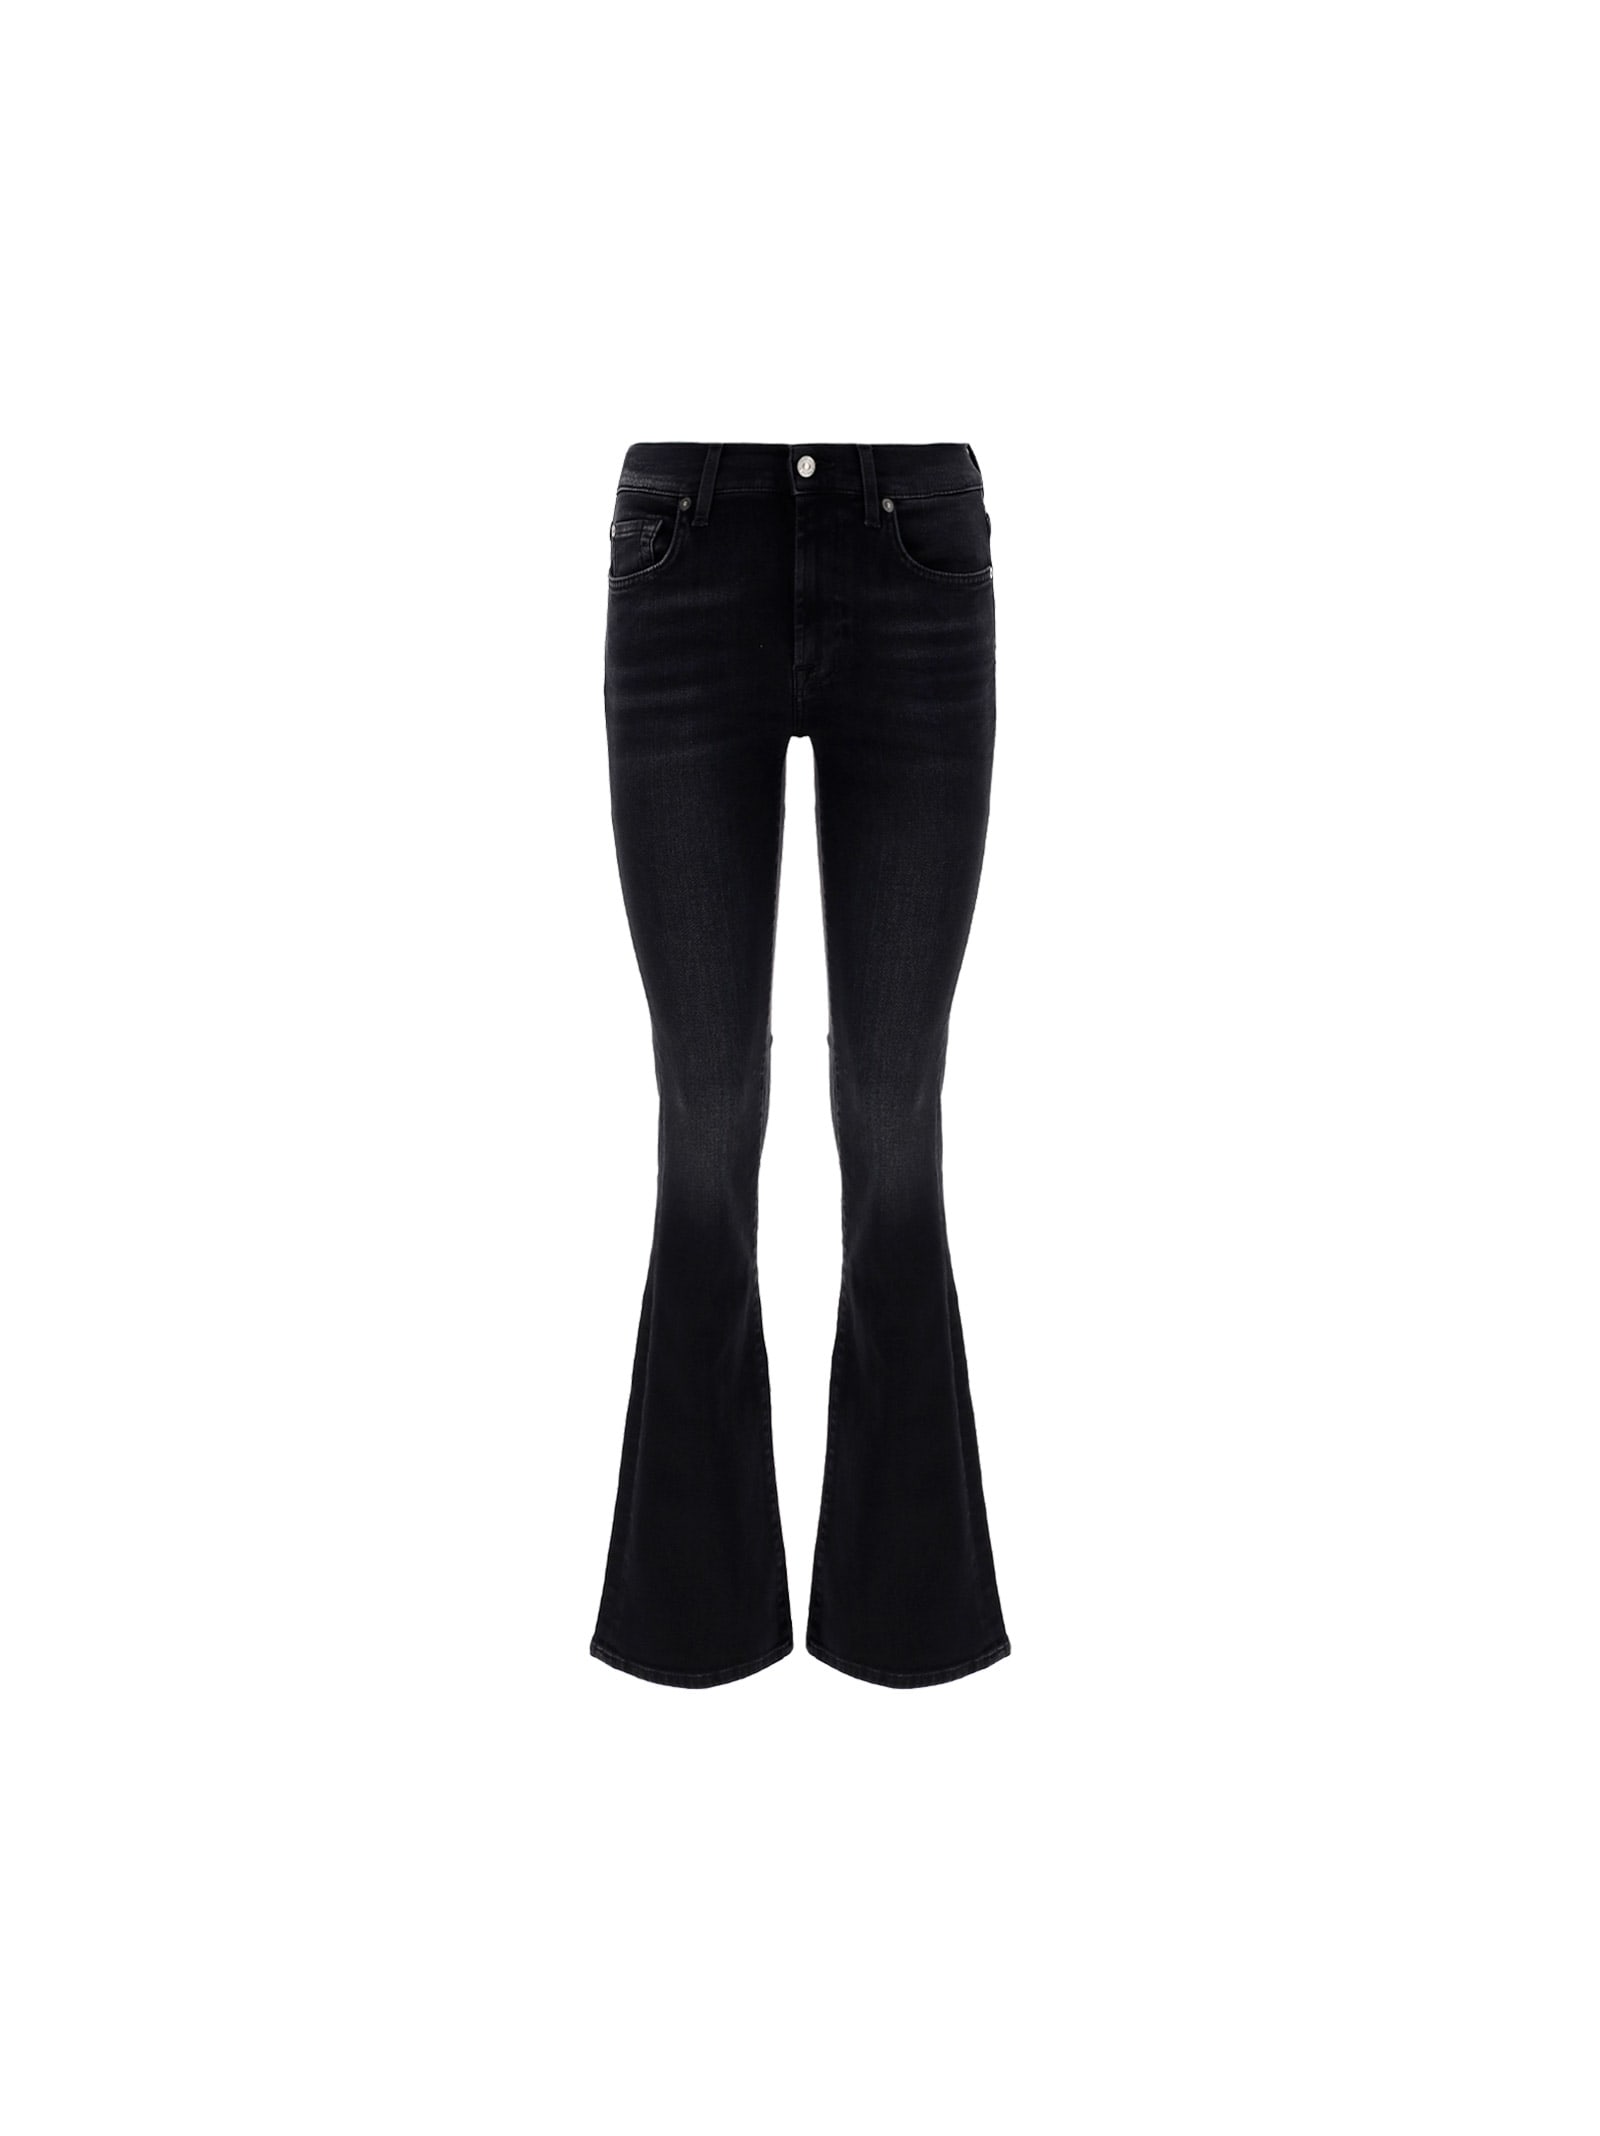 7 For All Mankind 7forallmankind Soho Jeans